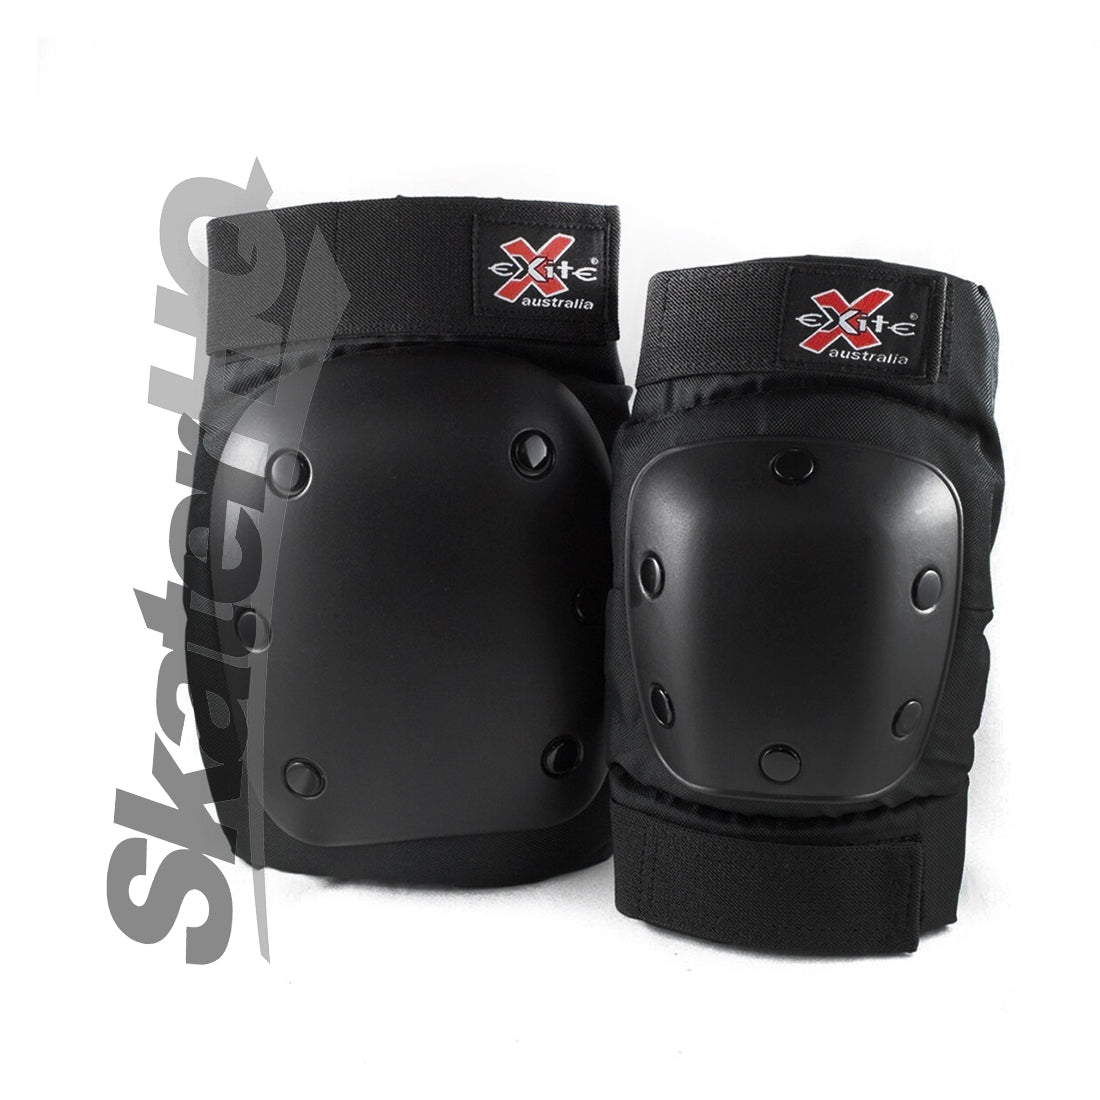 Exite Creatures 2-Pack - Black - Adult Small Protective Gear